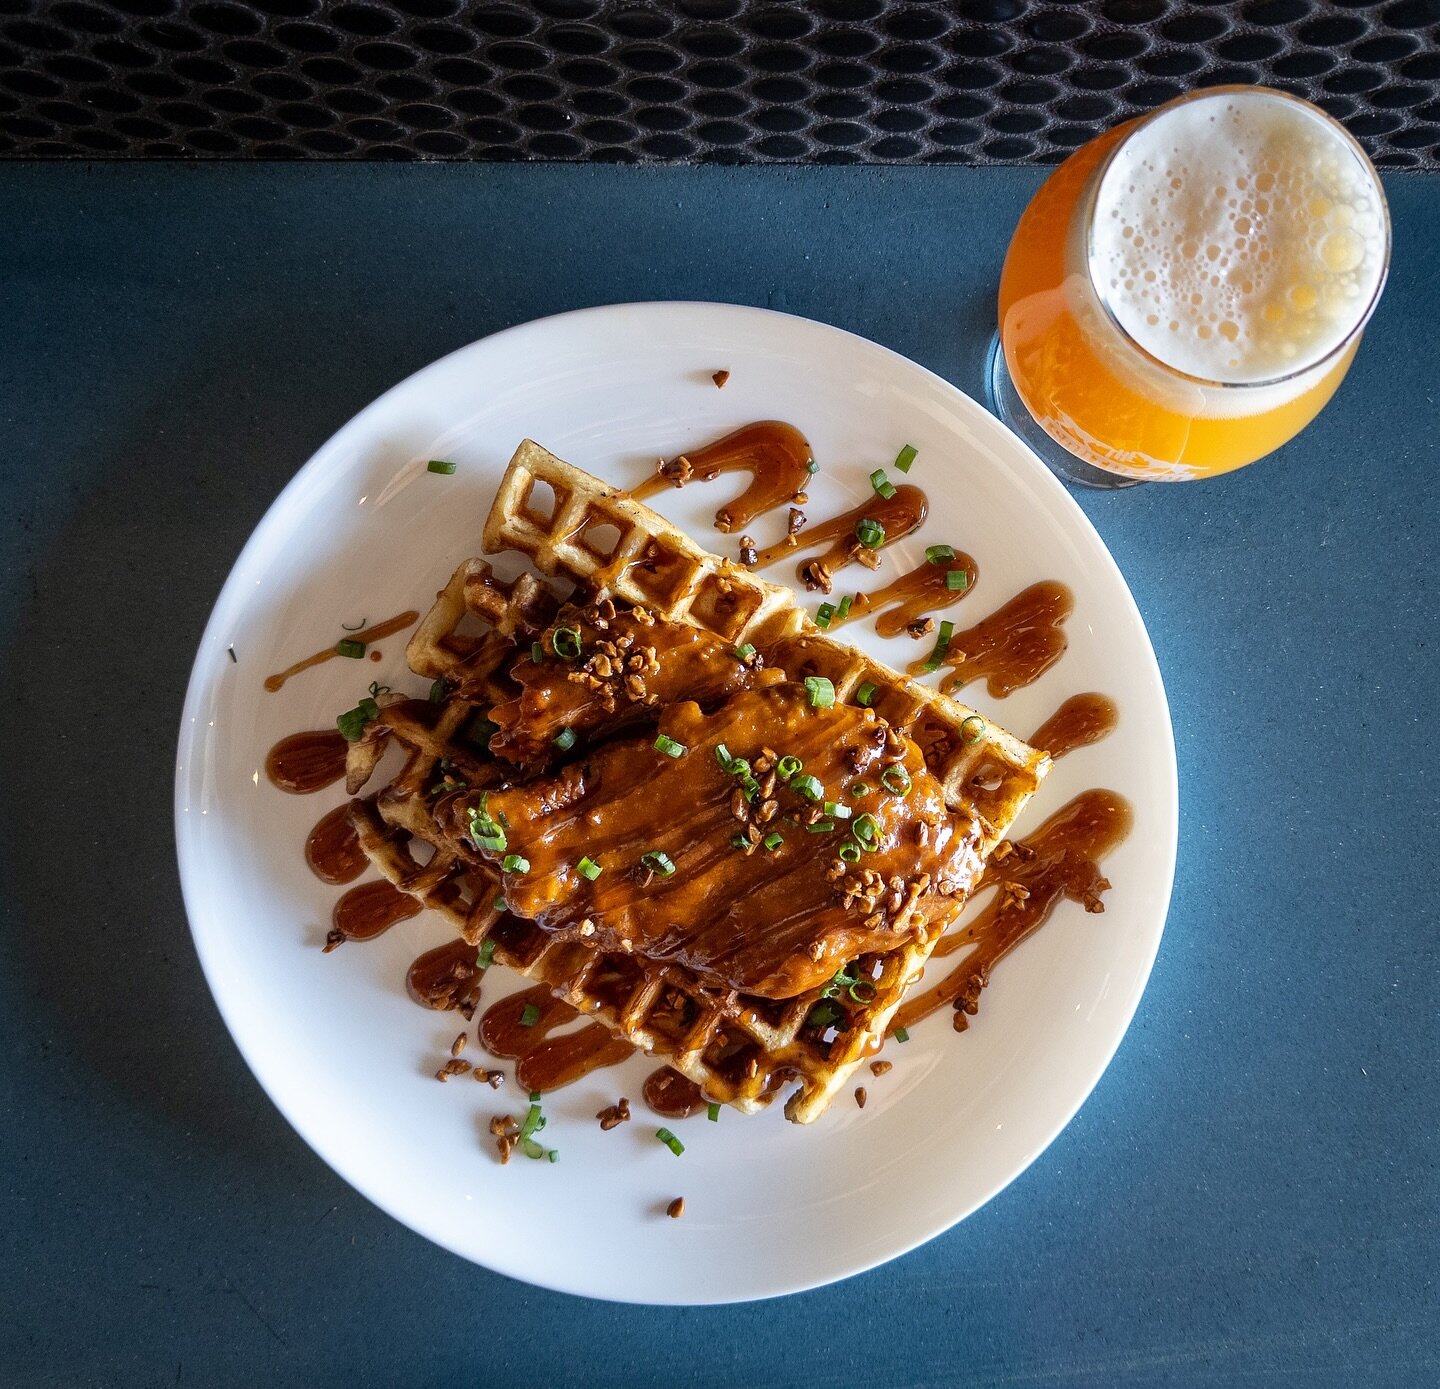 Thai Peanut Chicken &amp; Waffles
fried chicken breast, buttermilk waffle, 
spicy peanut sauce, plum-hoisin jam, 
chives, crushed peanuts.

Available for brunch today 10am-2pm (while supplies last). 

Also on the brunch menu: shrimp &amp; grits, brea